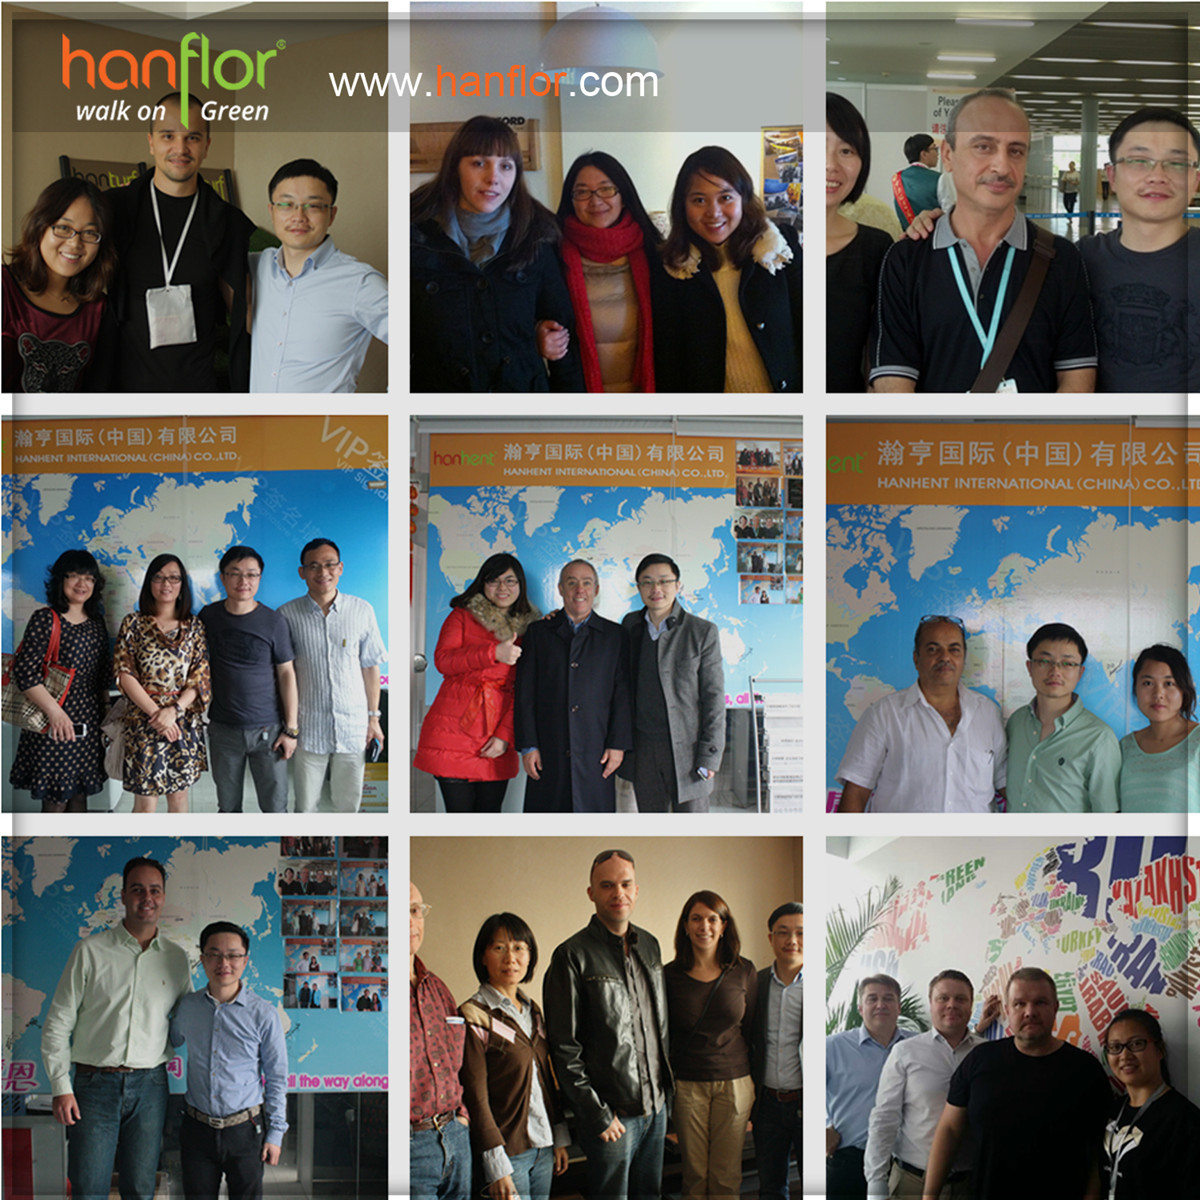 Customers:Many customer and clients visit our office and check the pvc floor, confirm the cooperation with us. Many of them we have cooperated for more than 5years and with good friendship, thanks for the trust of our clients and customers, we will do better to support our clients and customers.plastic floor,pvc floor, Vinyl floor, plastic flooring, pvc flooring, Vinyl flooring, pvc plank, vinyl plank, pvc tile, vinyl tile, click vinyl flooring, interlocking vinyl flooring, unilin click flooring, unilin click vinyl flooring, click pvc flooring, interlocking pvc flooring, unilin click vinyl flooring, unilin click pvc flooring